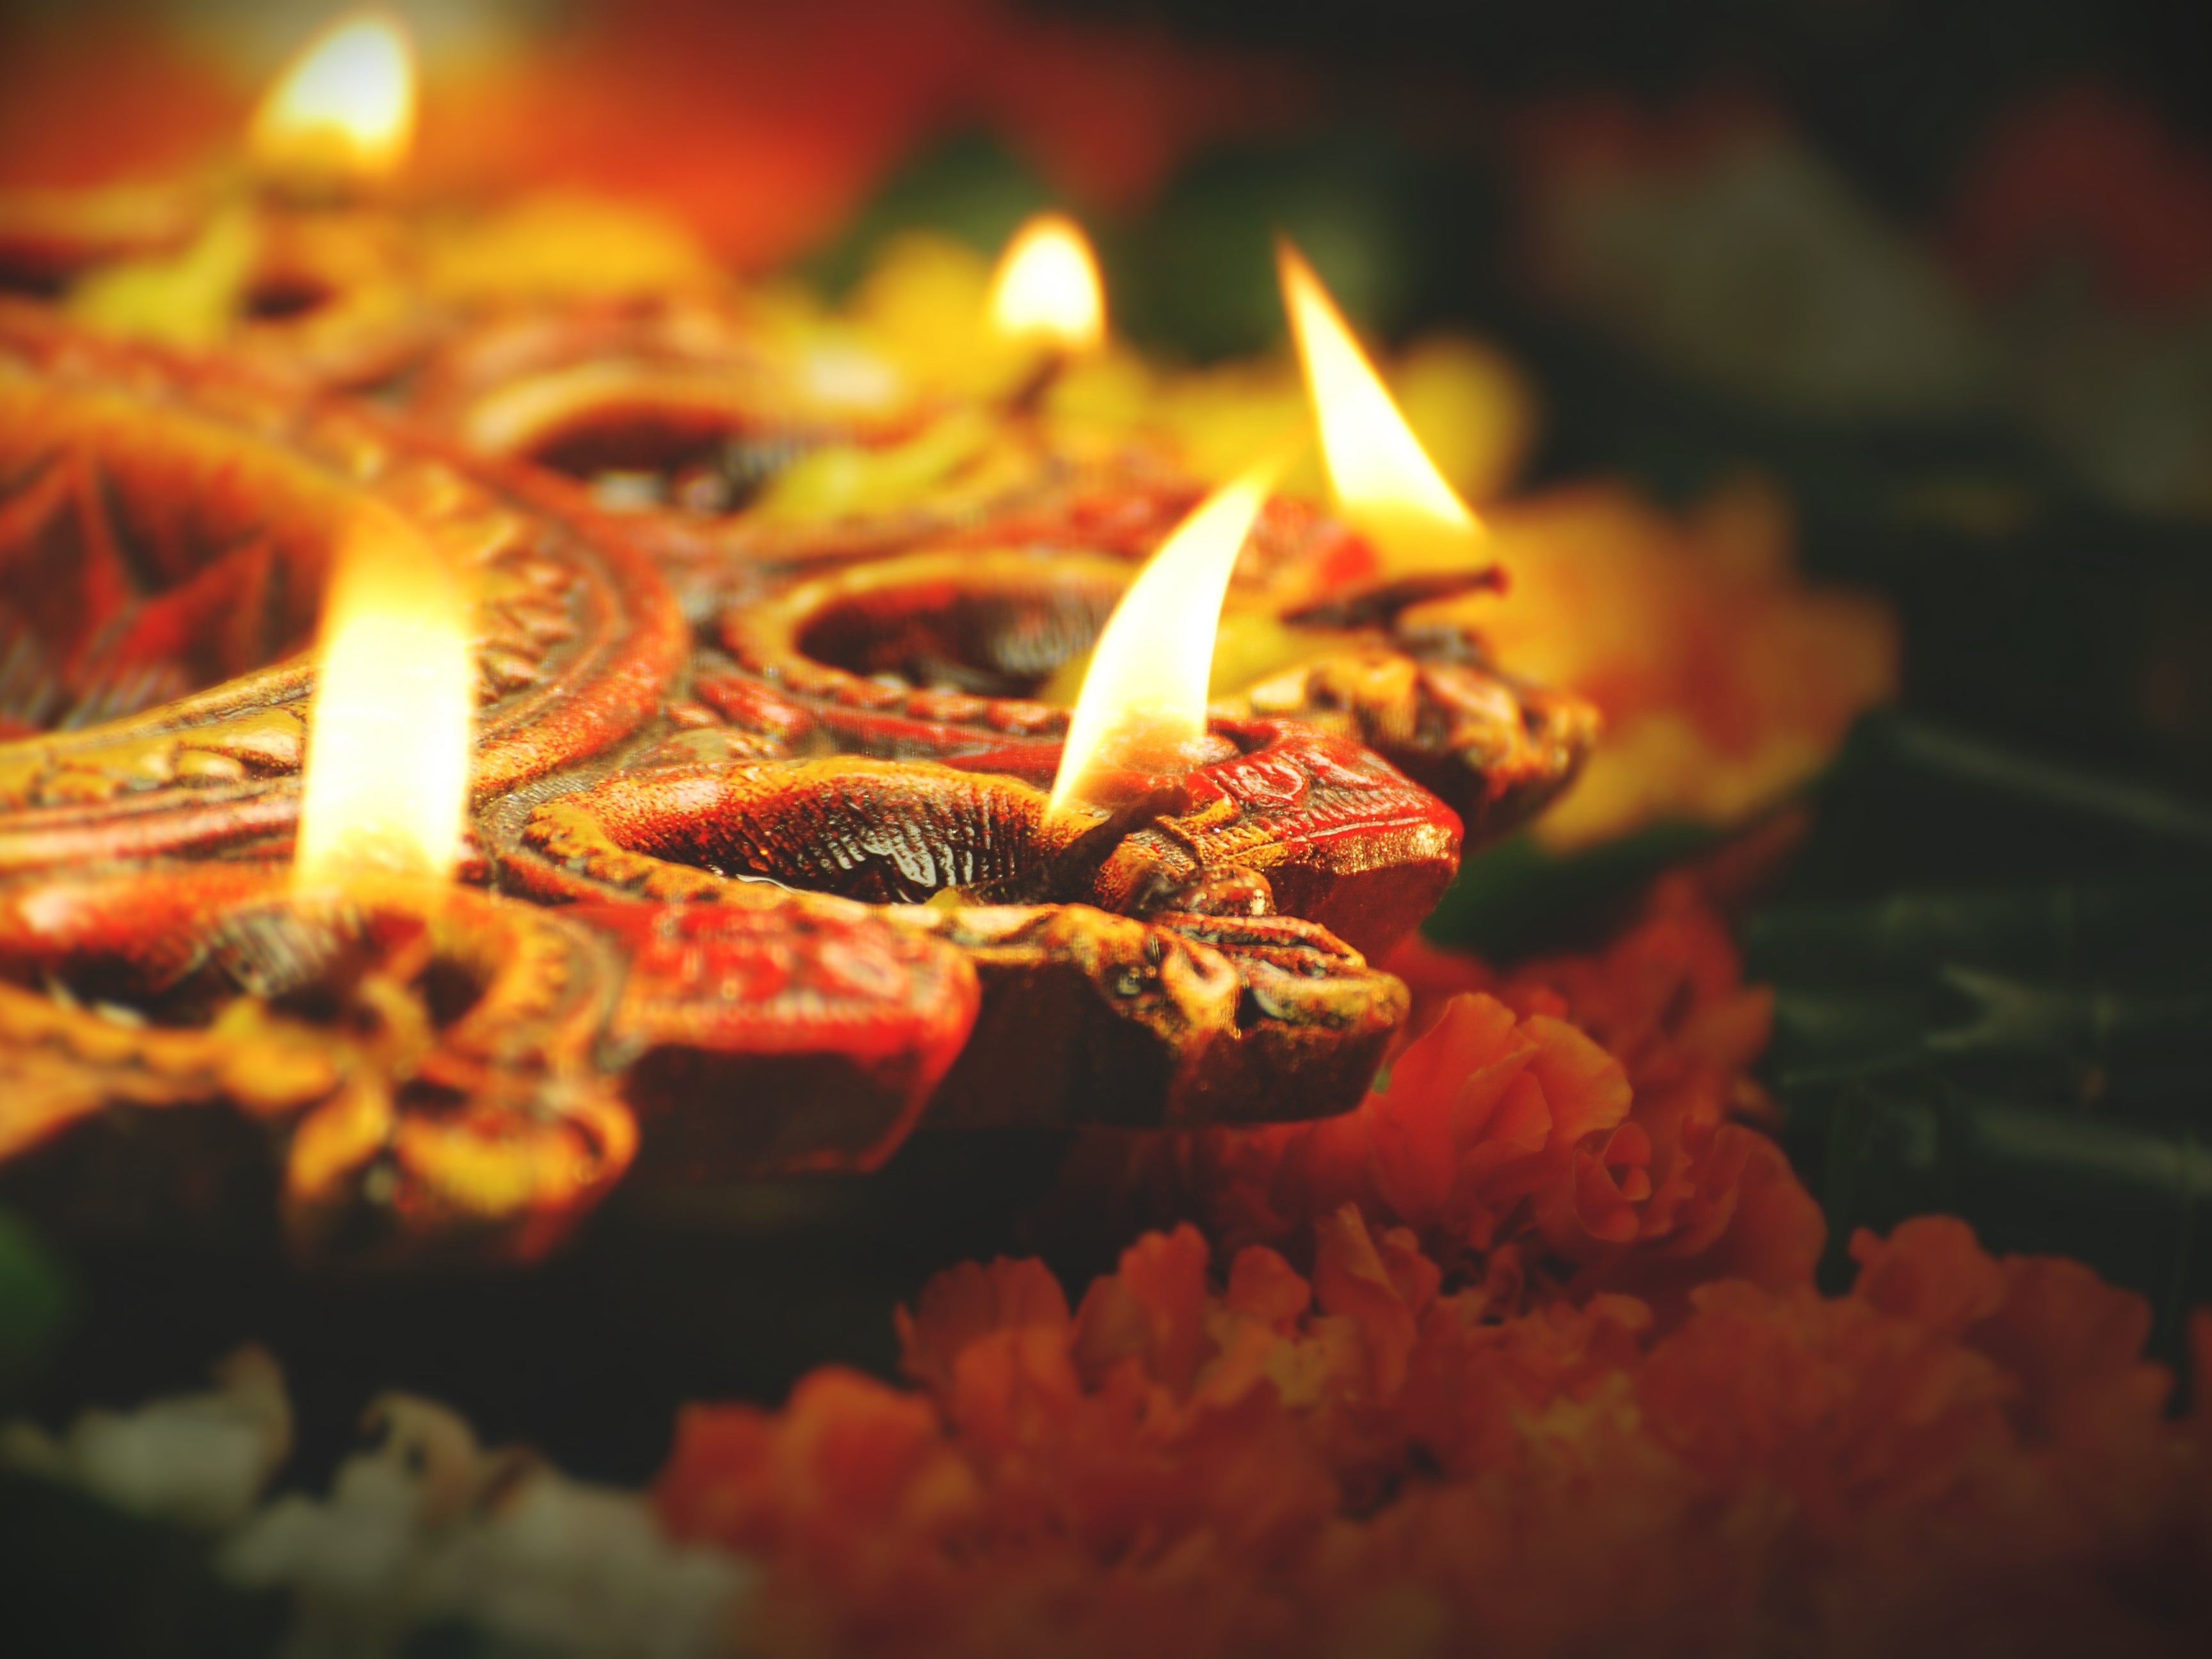 Diwali is also know as the Festival of Lights